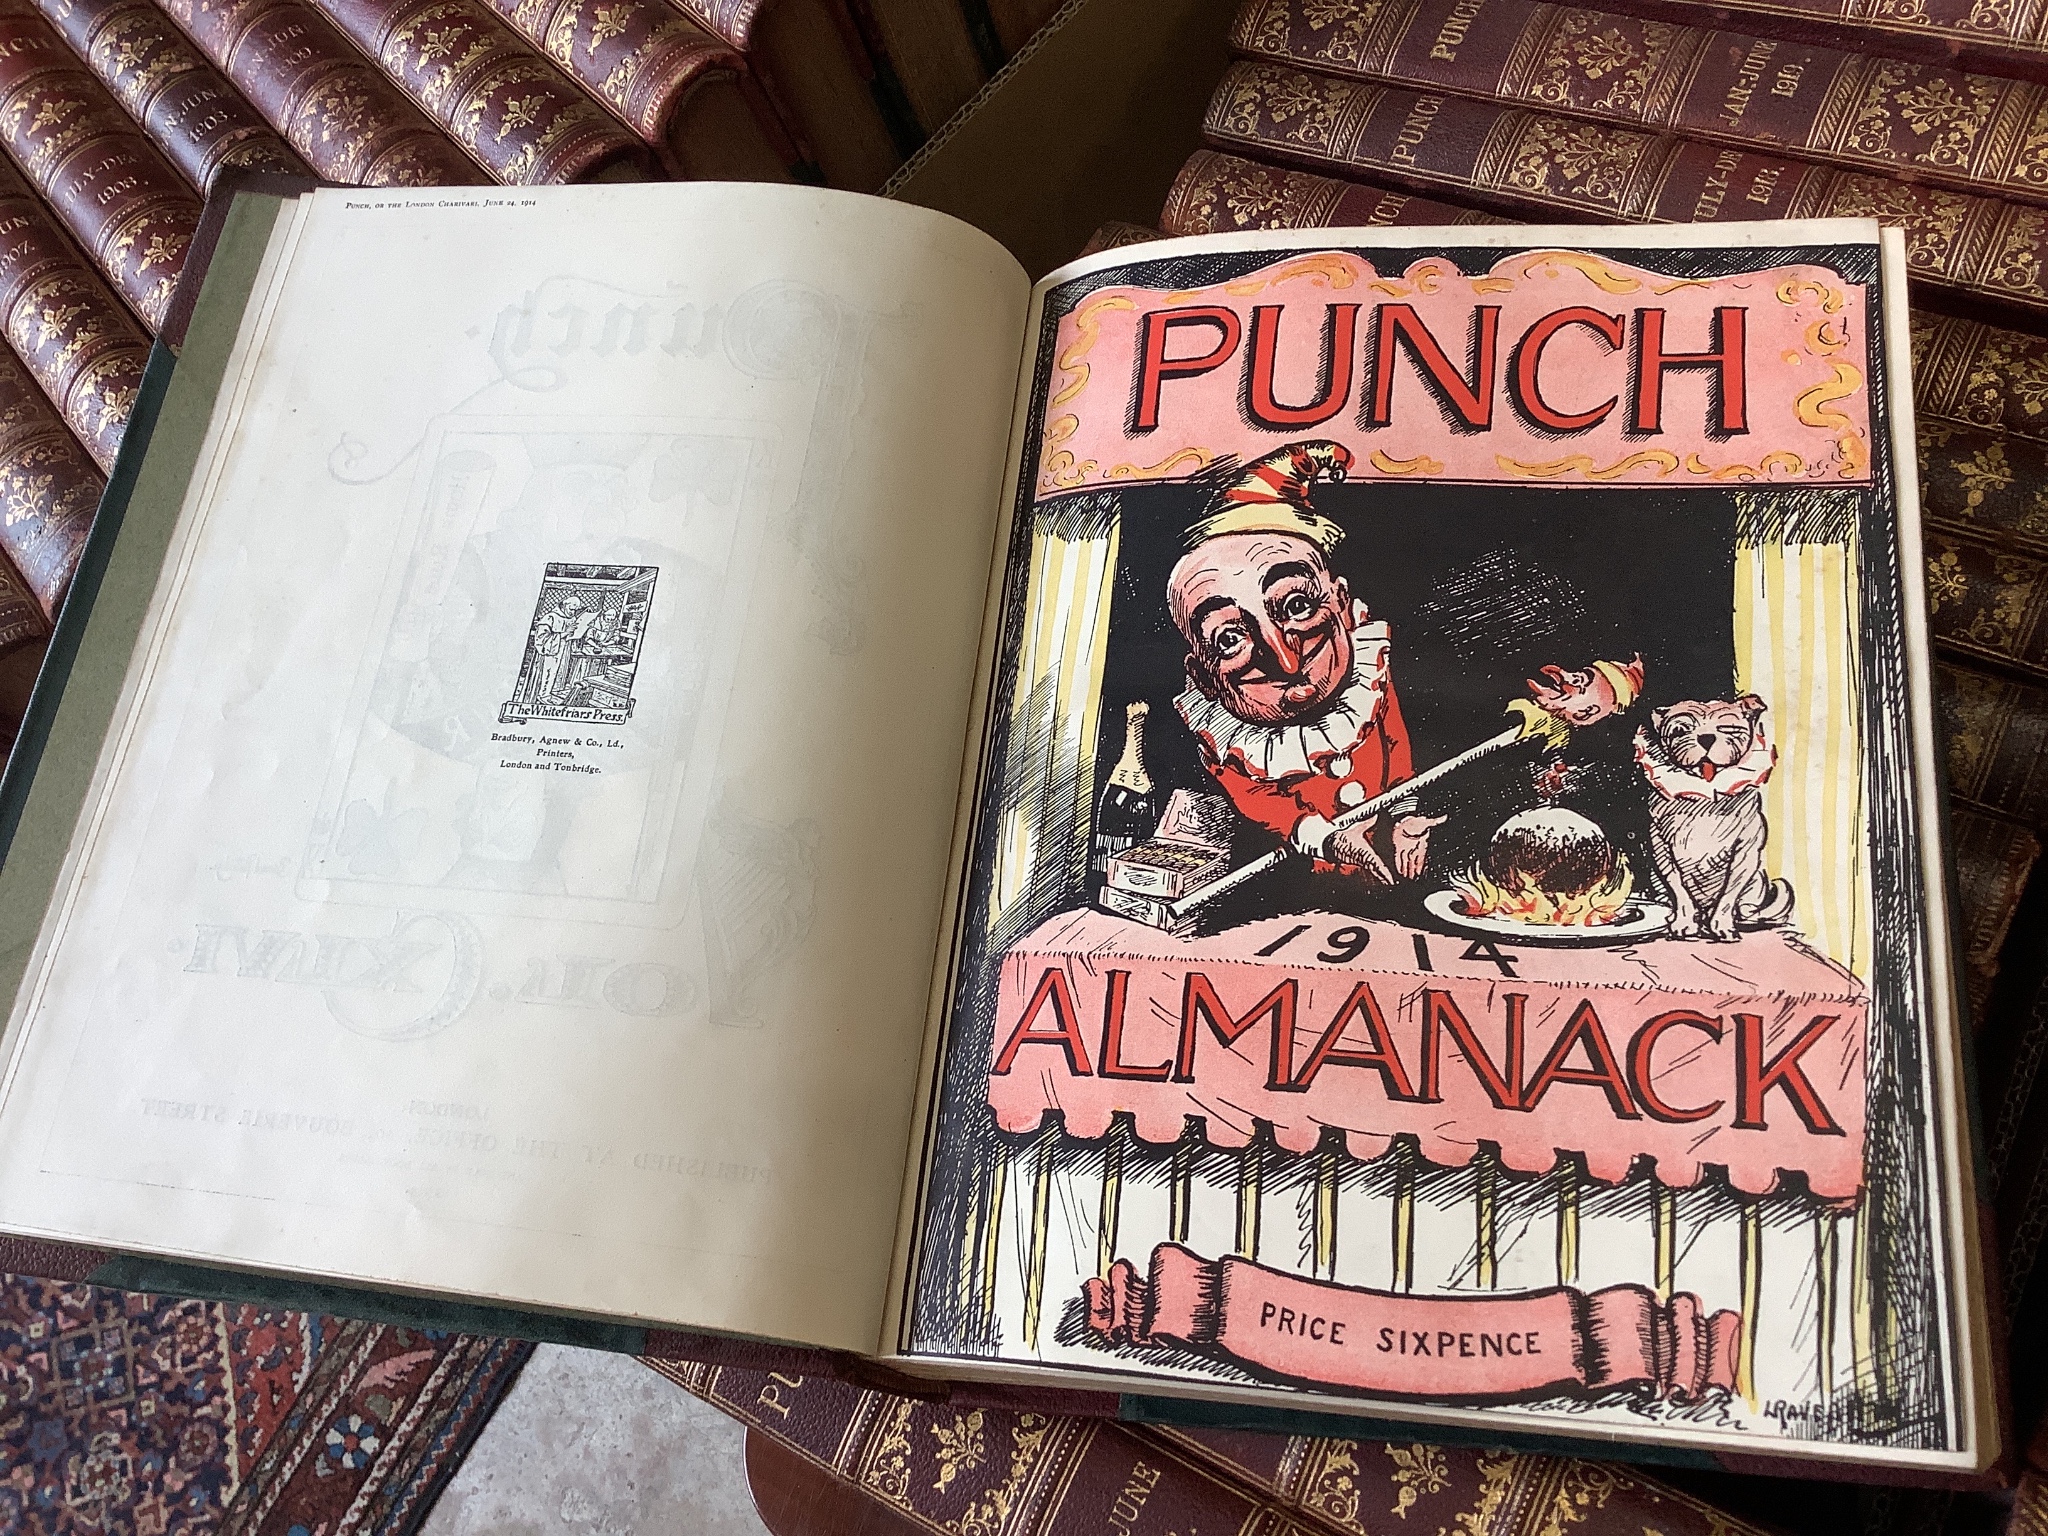 Punch Magazine January 1906 to June 1916, January 1917 to June 1938, January 1950 to June 1966 in 98 gilt tooled leather bindings